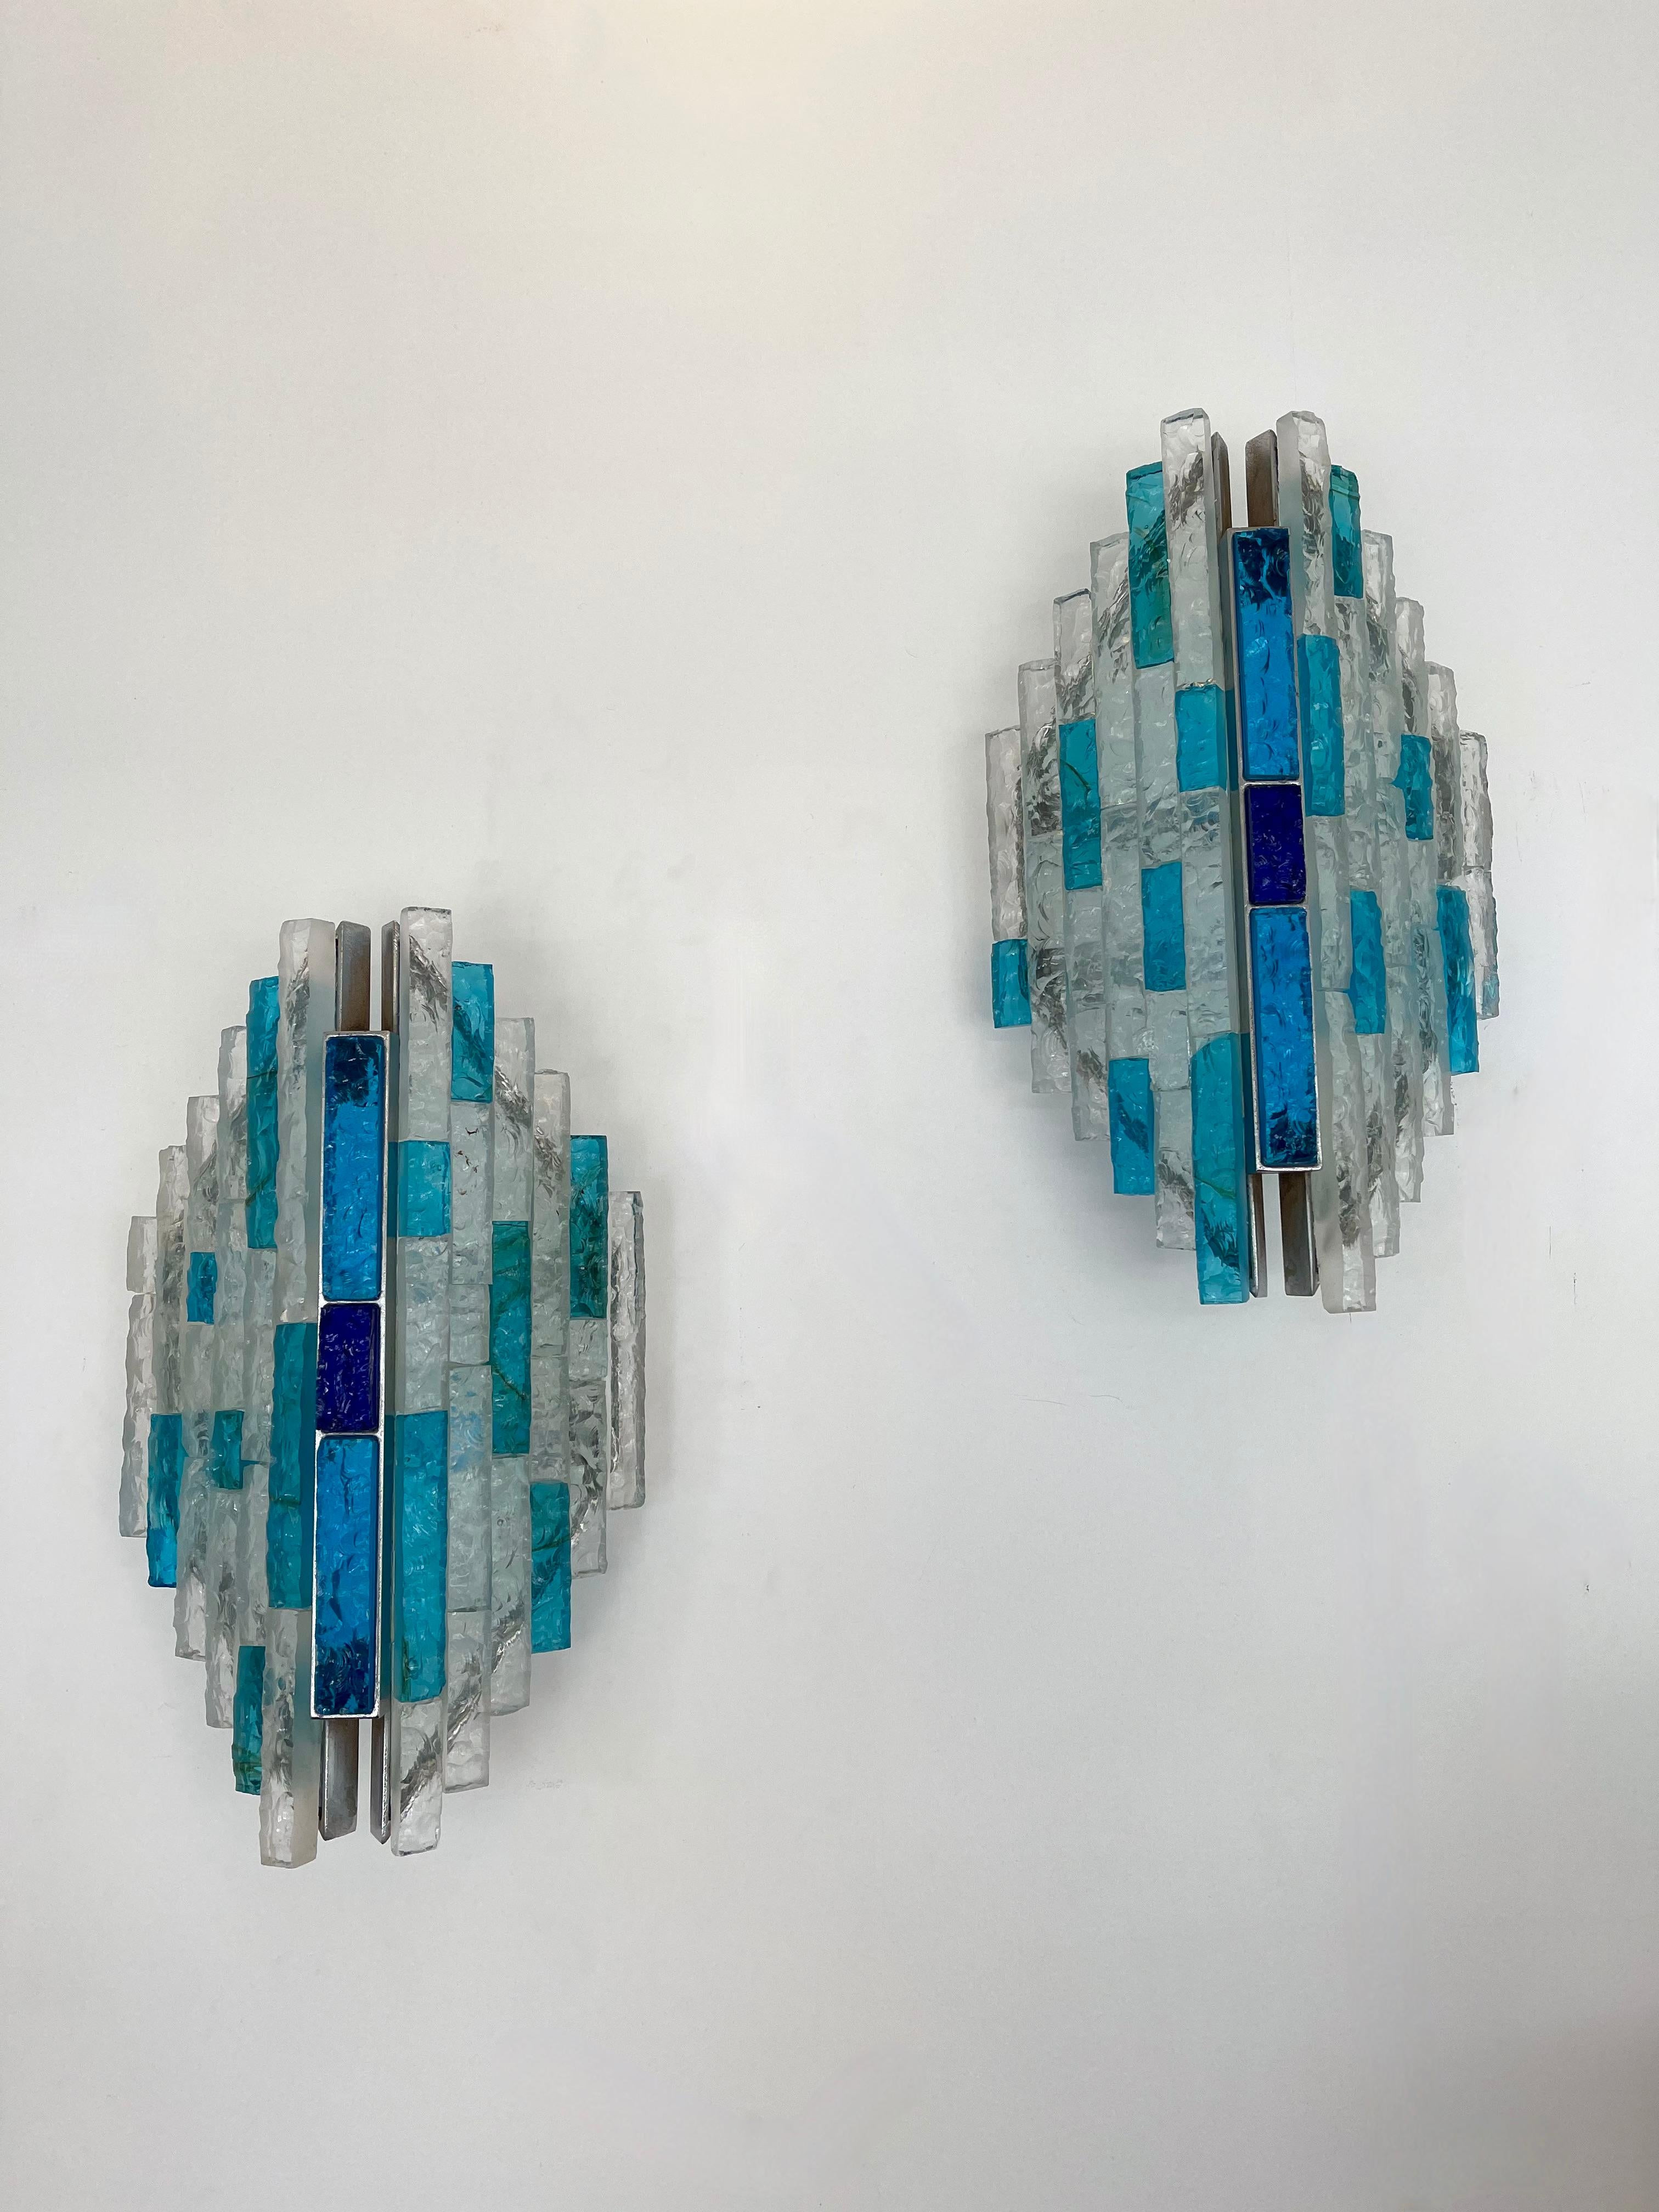 Pair of wall lamps lights sconces hammered glass and silver wrought iron by the manufacture Biancardi and Jordan Arte in Verona in a Brutalist style, the concurrent of Longobard and Poliarte during the 1970s. Famous design like Carlo Aldo Nason for